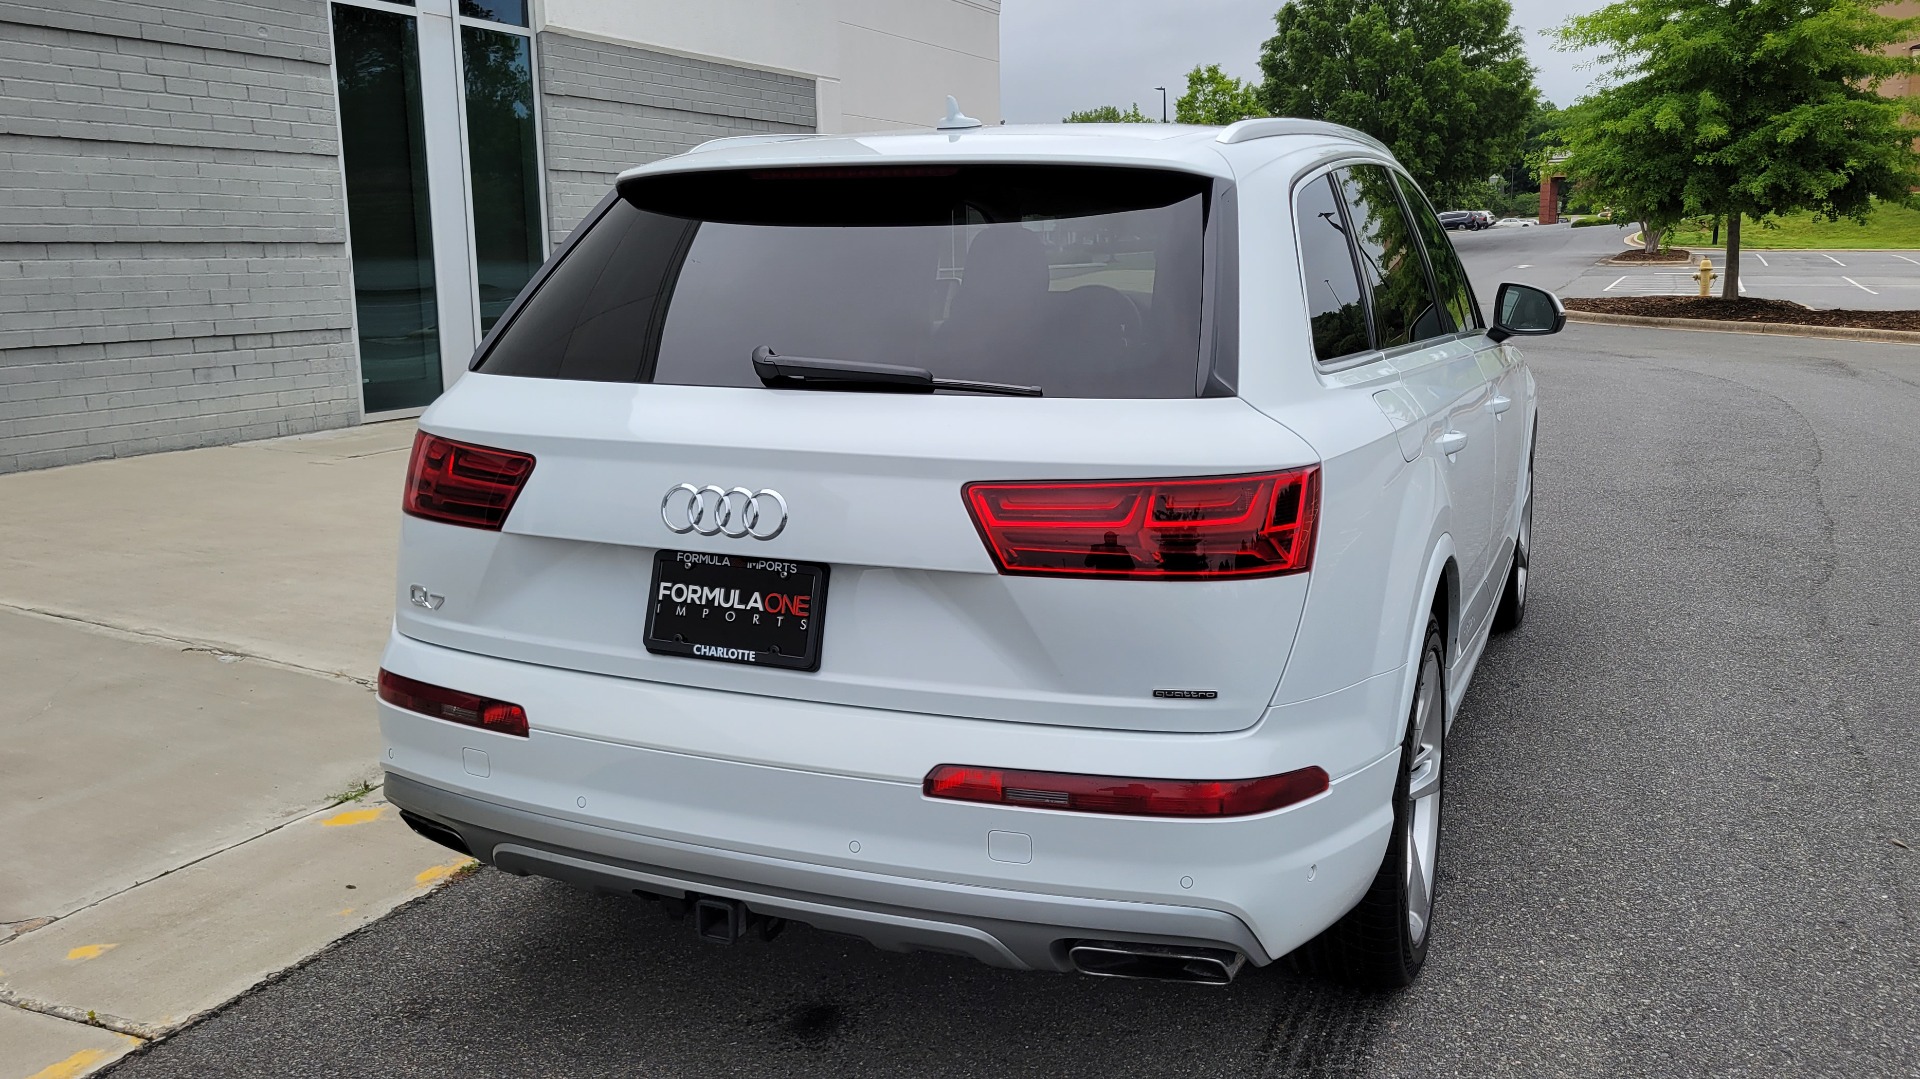 Used 2019 Audi Q7 PRESTIGE / CONV PKG / BOSE / HUD / CLD WTHR / TOWING / REARVIEW for sale $51,995 at Formula Imports in Charlotte NC 28227 8